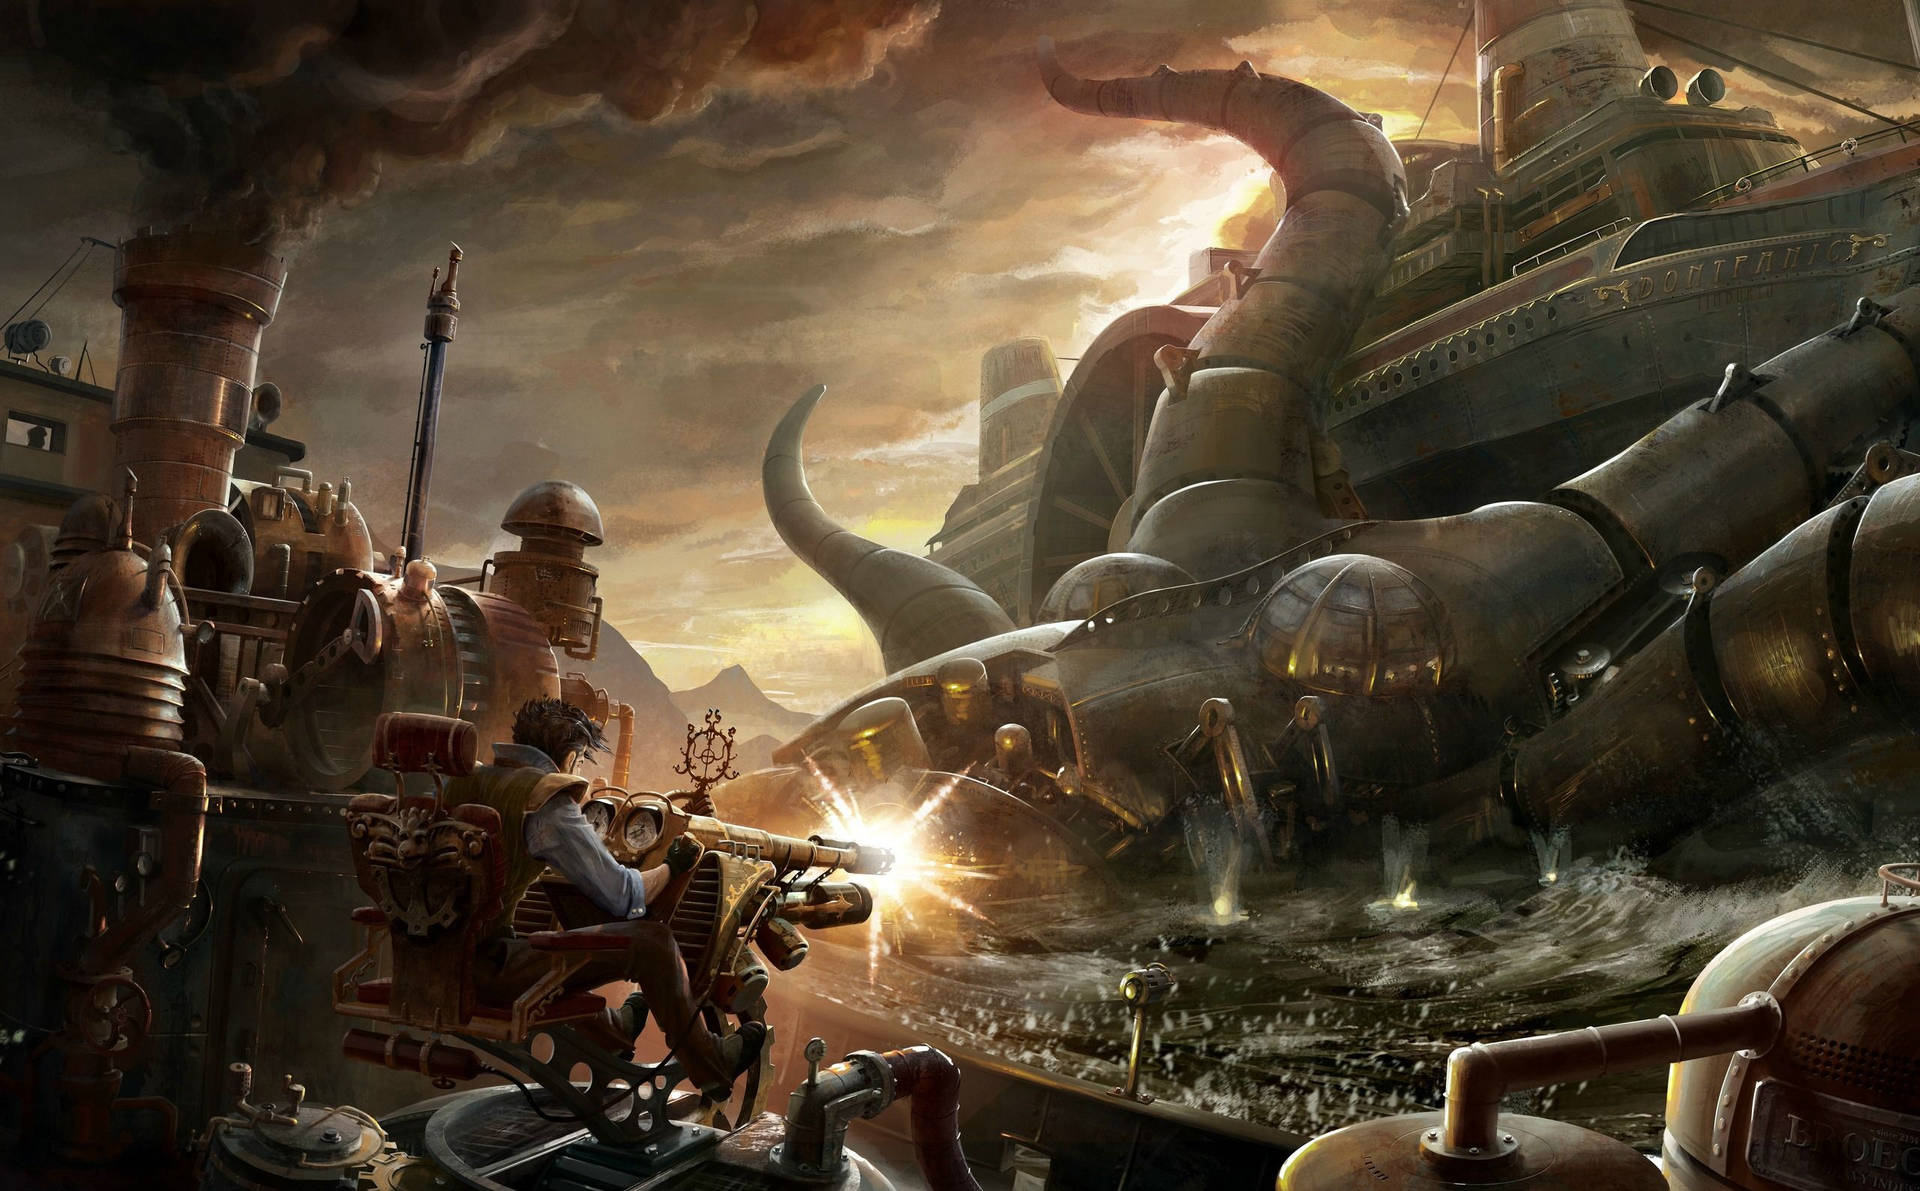 Steampunk underwater battleships daringly engage in a thrilling clash Wallpaper